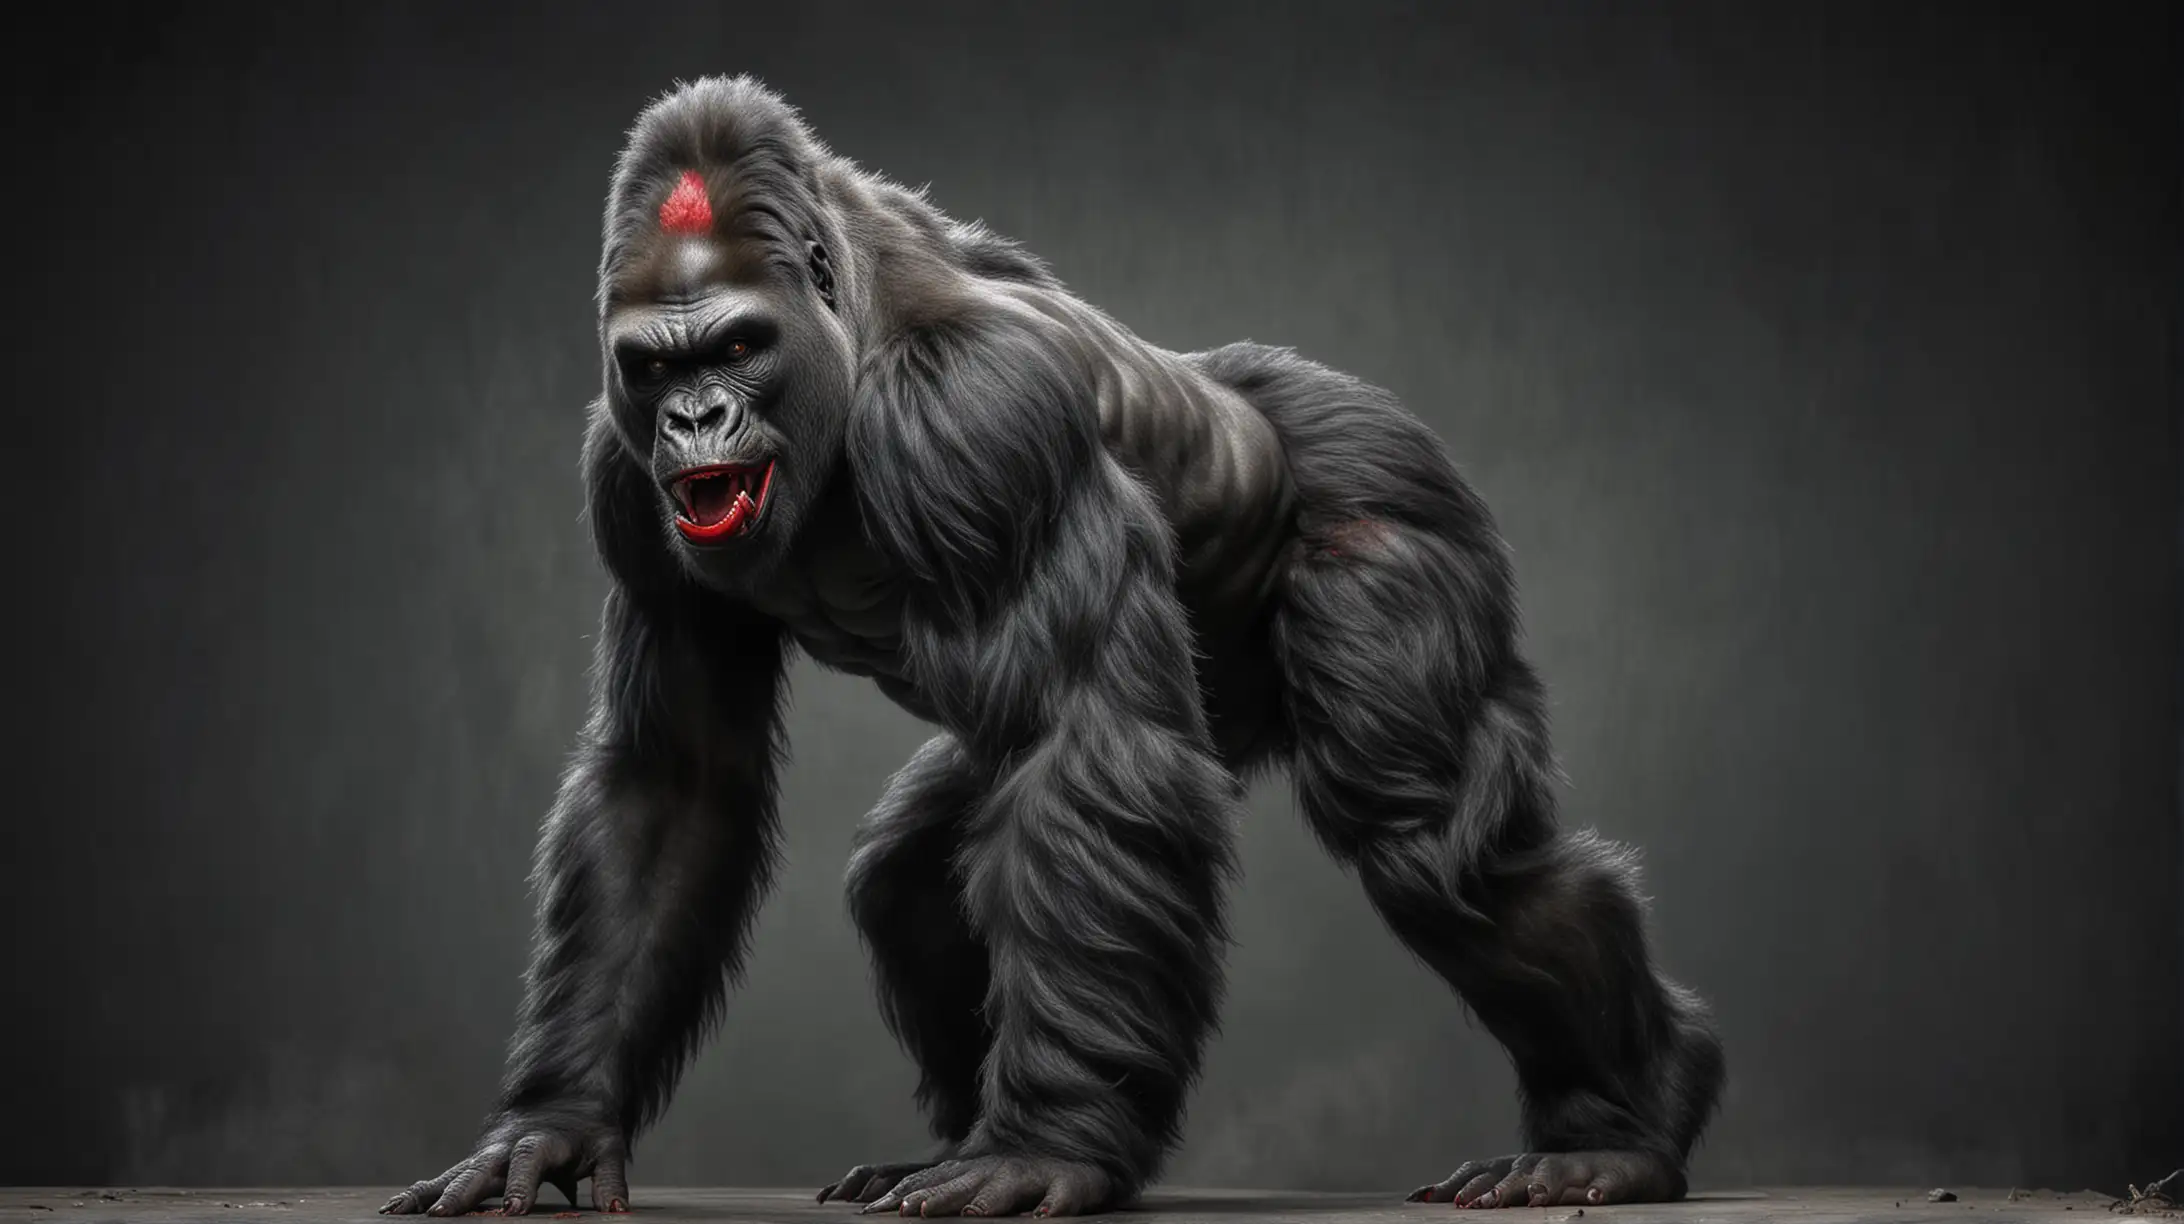 Sinister Gorilla Monster with Bold Red Lipstick